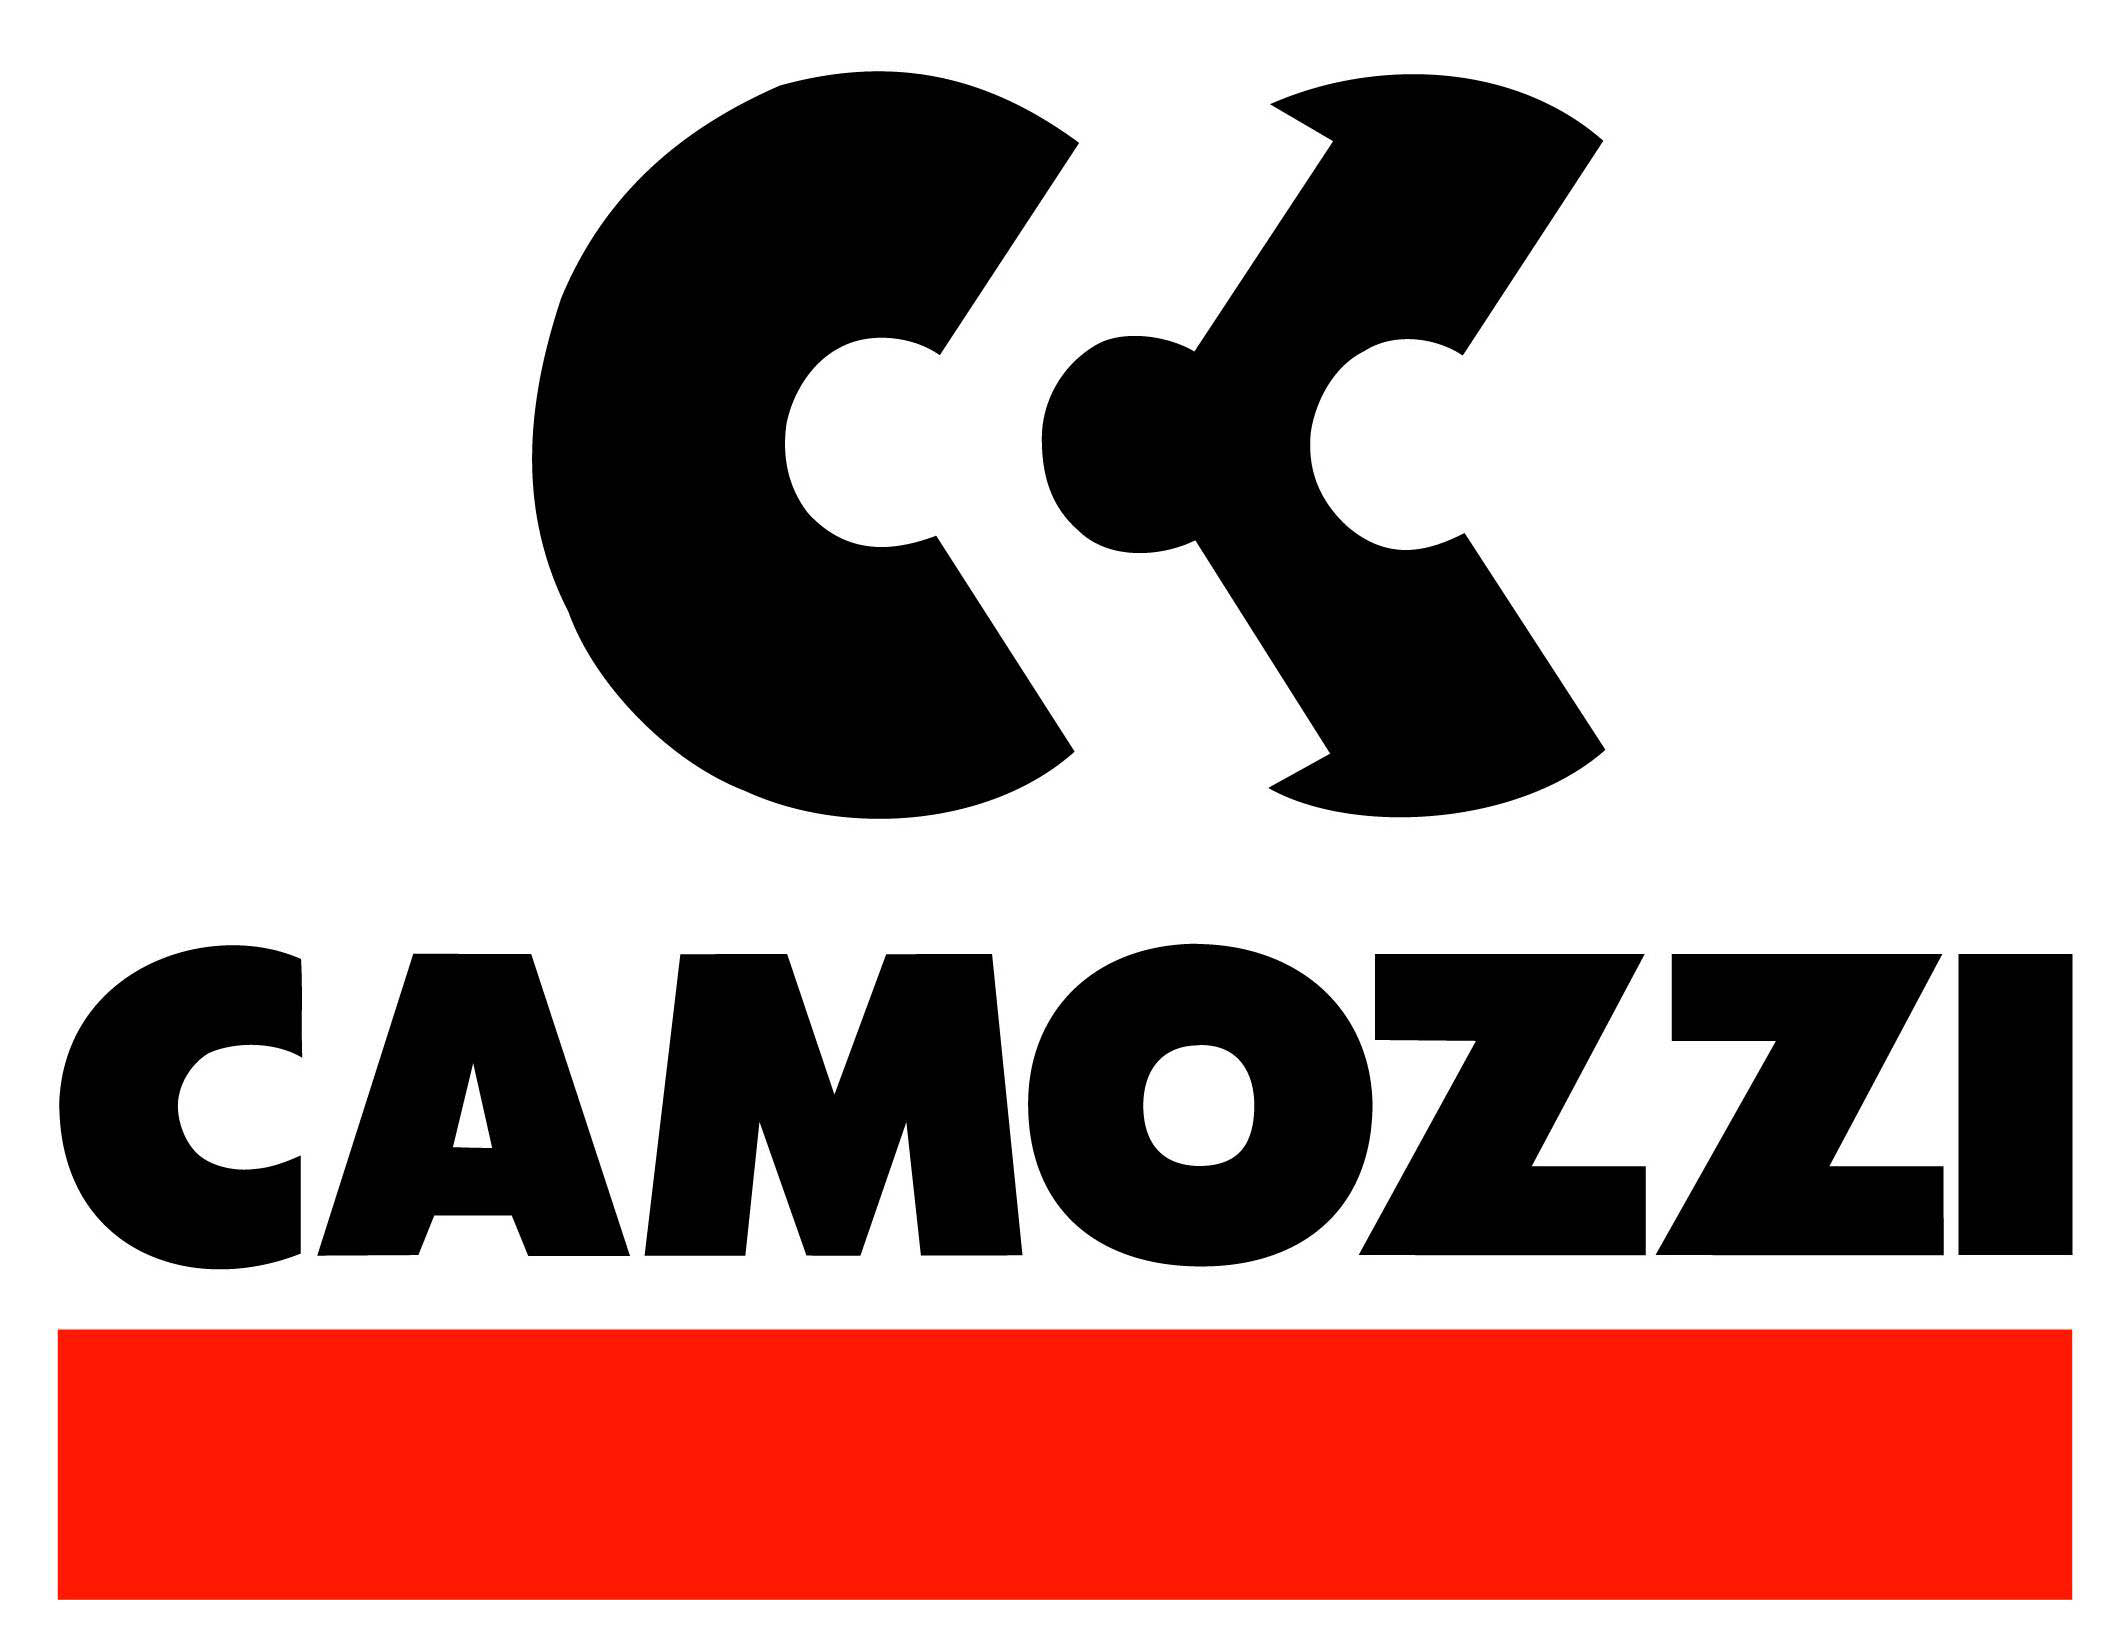 CAMOZZI Cylinders, Valves & Fittings 